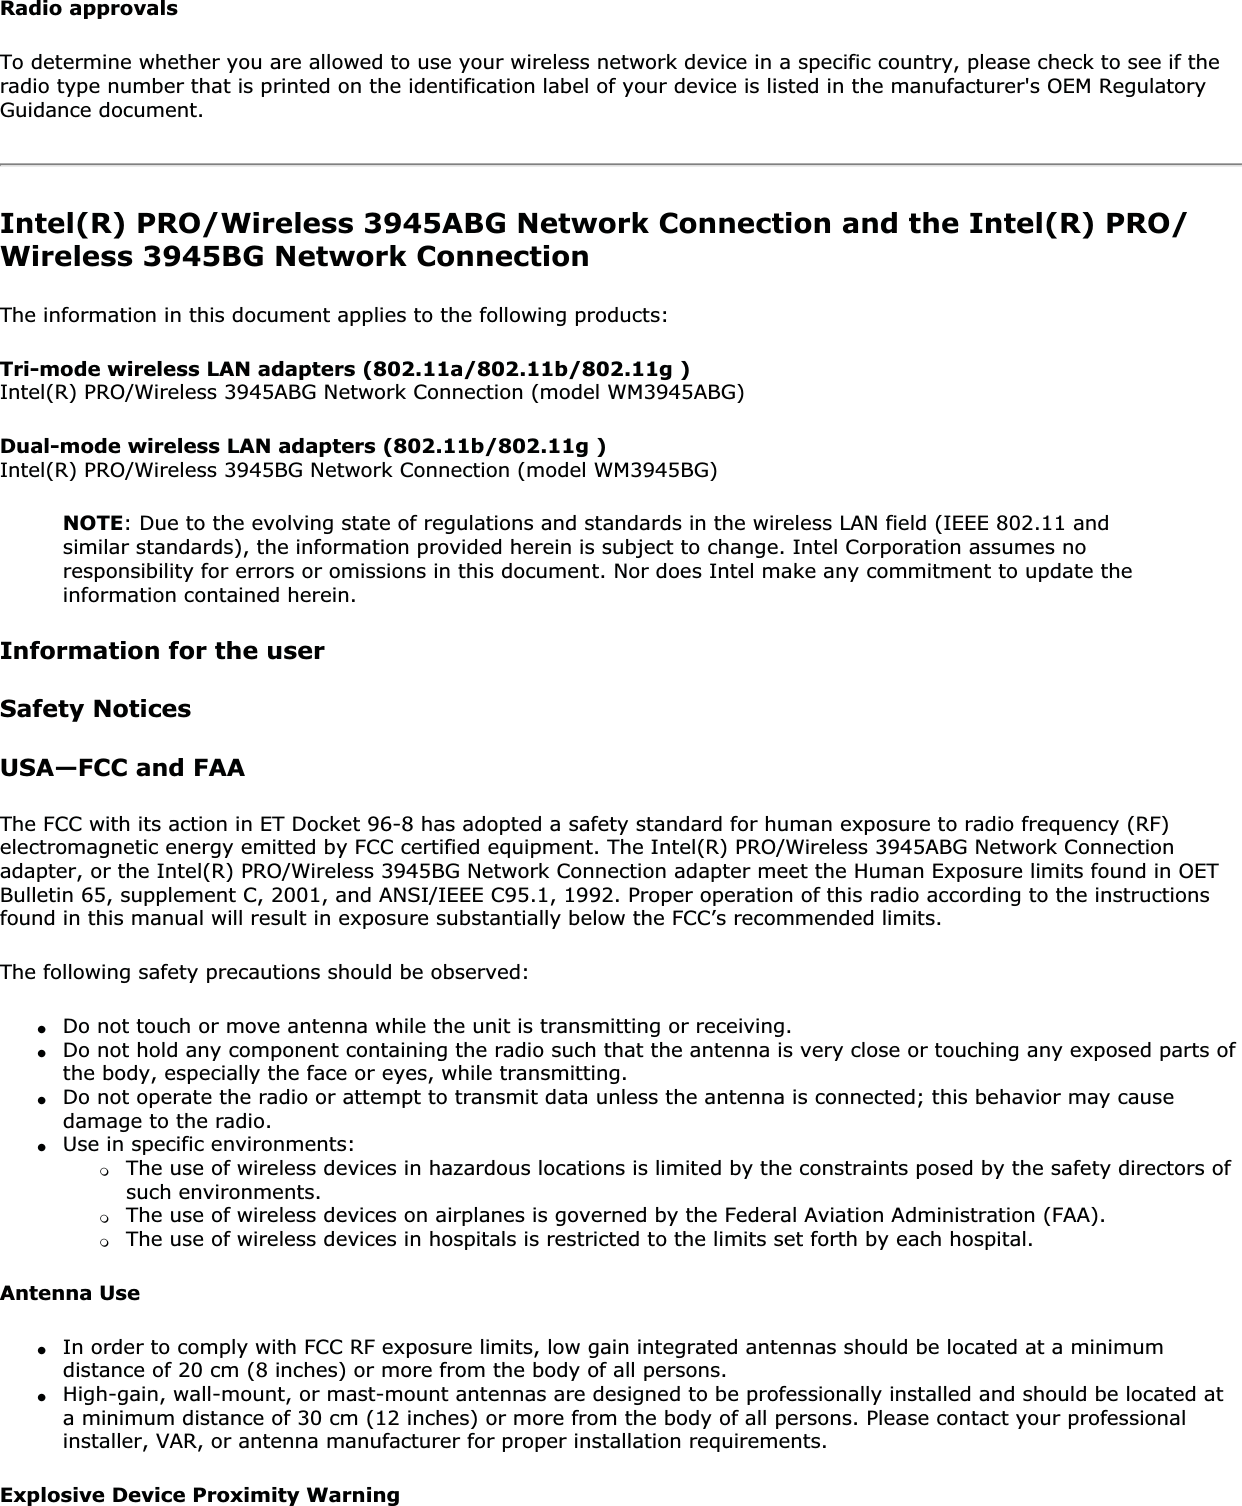 Radio approvalsTo determine whether you are allowed to use your wireless network device in a specific country, please check to see if the radio type number that is printed on the identification label of your device is listed in the manufacturer&apos;s OEM Regulatory Guidance document.Intel(R) PRO/Wireless 3945ABG Network Connection and the Intel(R) PRO/Wireless 3945BG Network ConnectionThe information in this document applies to the following products:Tri-mode wireless LAN adapters (802.11a/802.11b/802.11g ) Intel(R) PRO/Wireless 3945ABG Network Connection (model WM3945ABG)Dual-mode wireless LAN adapters (802.11b/802.11g ) Intel(R) PRO/Wireless 3945BG Network Connection (model WM3945BG)NOTE: Due to the evolving state of regulations and standards in the wireless LAN field (IEEE 802.11 and similar standards), the information provided herein is subject to change. Intel Corporation assumes no responsibility for errors or omissions in this document. Nor does Intel make any commitment to update the information contained herein.Information for the userSafety NoticesUSA—FCC and FAAThe FCC with its action in ET Docket 96-8 has adopted a safety standard for human exposure to radio frequency (RF) electromagnetic energy emitted by FCC certified equipment. The Intel(R) PRO/Wireless 3945ABG Network Connection adapter, or the Intel(R) PRO/Wireless 3945BG Network Connection adapter meet the Human Exposure limits found in OET Bulletin 65, supplement C, 2001, and ANSI/IEEE C95.1, 1992. Proper operation of this radio according to the instructions found in this manual will result in exposure substantially below the FCC’s recommended limits.The following safety precautions should be observed:●Do not touch or move antenna while the unit is transmitting or receiving.●Do not hold any component containing the radio such that the antenna is very close or touching any exposed parts of the body, especially the face or eyes, while transmitting.●Do not operate the radio or attempt to transmit data unless the antenna is connected; this behavior may cause damage to the radio.●Use in specific environments: ❍The use of wireless devices in hazardous locations is limited by the constraints posed by the safety directors of such environments.❍The use of wireless devices on airplanes is governed by the Federal Aviation Administration (FAA).❍The use of wireless devices in hospitals is restricted to the limits set forth by each hospital.Antenna Use●In order to comply with FCC RF exposure limits, low gain integrated antennas should be located at a minimum distance of 20 cm (8 inches) or more from the body of all persons.●High-gain, wall-mount, or mast-mount antennas are designed to be professionally installed and should be located at a minimum distance of 30 cm (12 inches) or more from the body of all persons. Please contact your professional installer, VAR, or antenna manufacturer for proper installation requirements.Explosive Device Proximity Warning